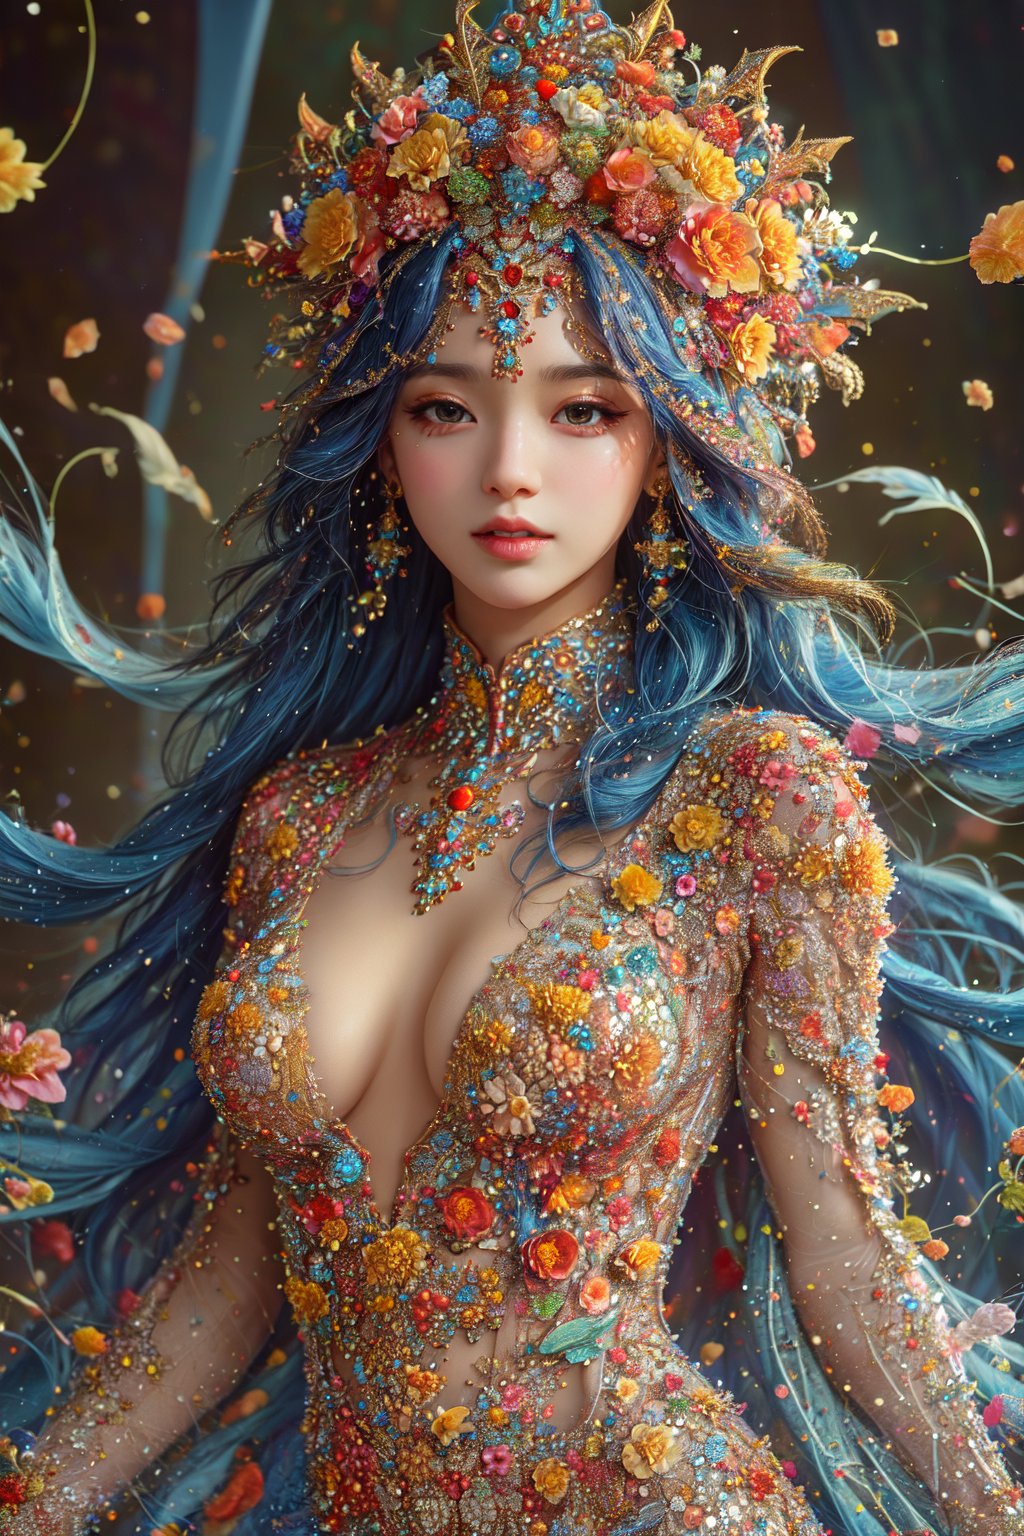 busty and sexy girl, 8k, masterpiece, ultra-realistic, best quality, high resolution, high definition,  The image portrays a person with striking flowing sky blue hair adorned  intricate jewelry. The overall aesthetic suggests a blend of regal elegance and fantasy,gem,beaded flower decoration